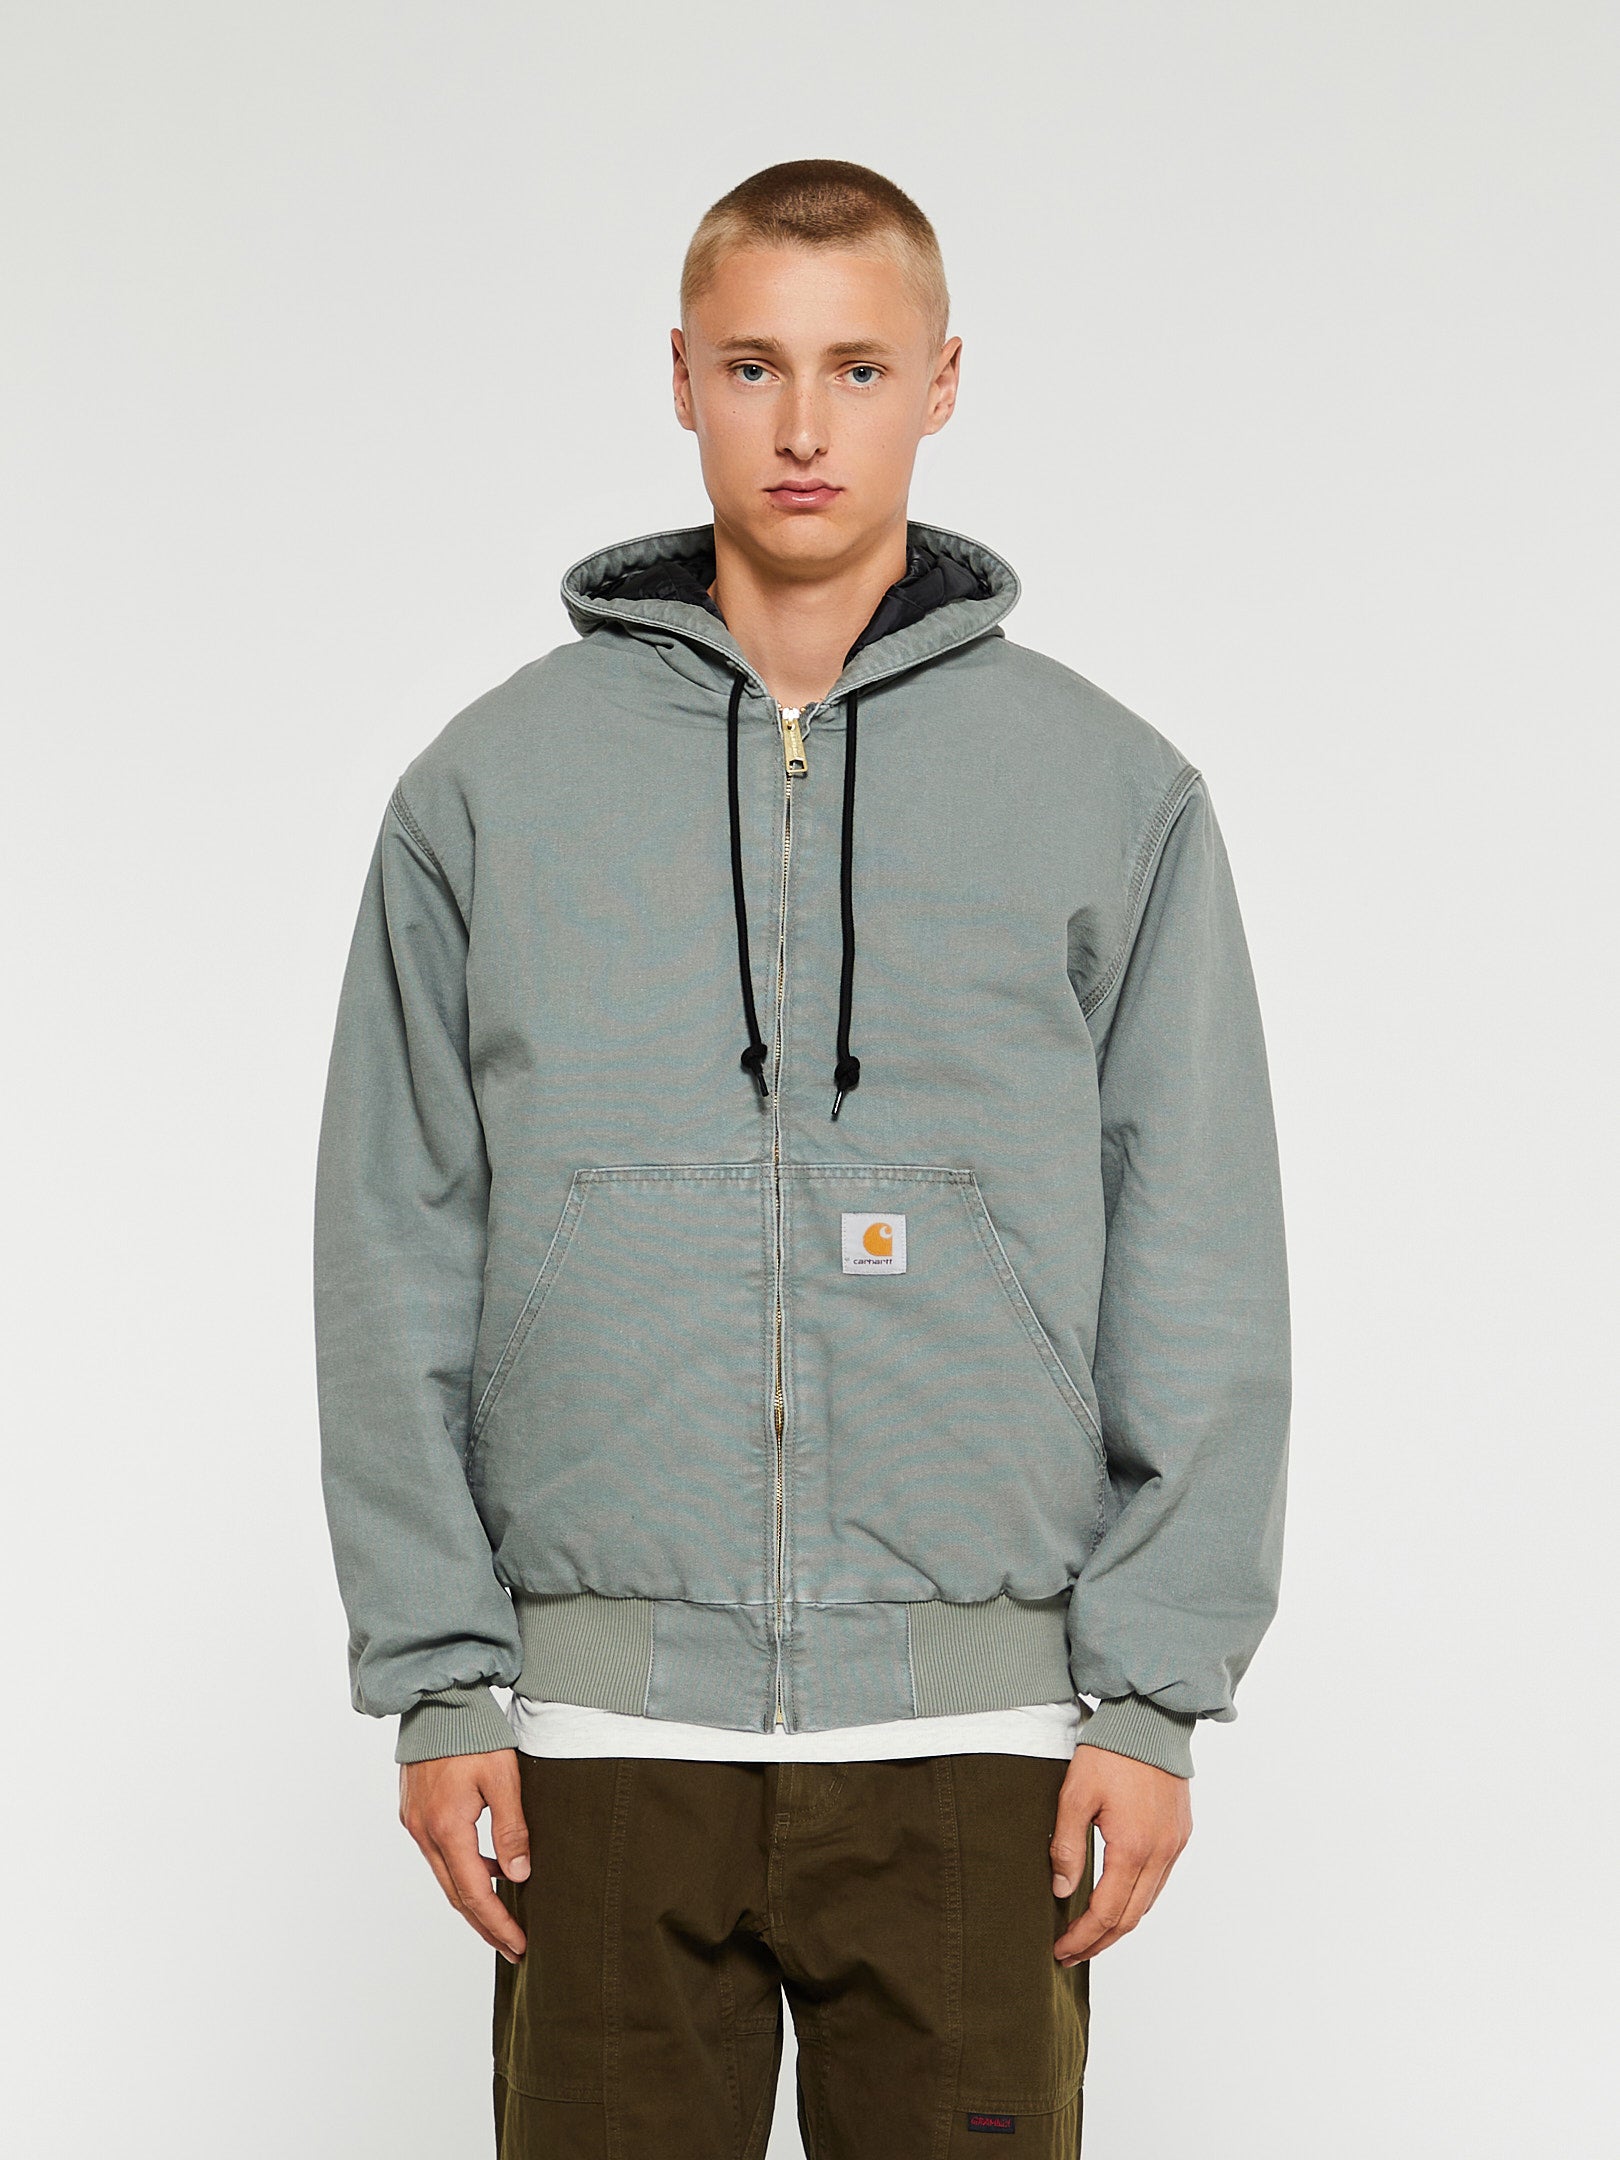 Carhartt WIP - OG Active Jacket in Smoke Green Aged Canvas